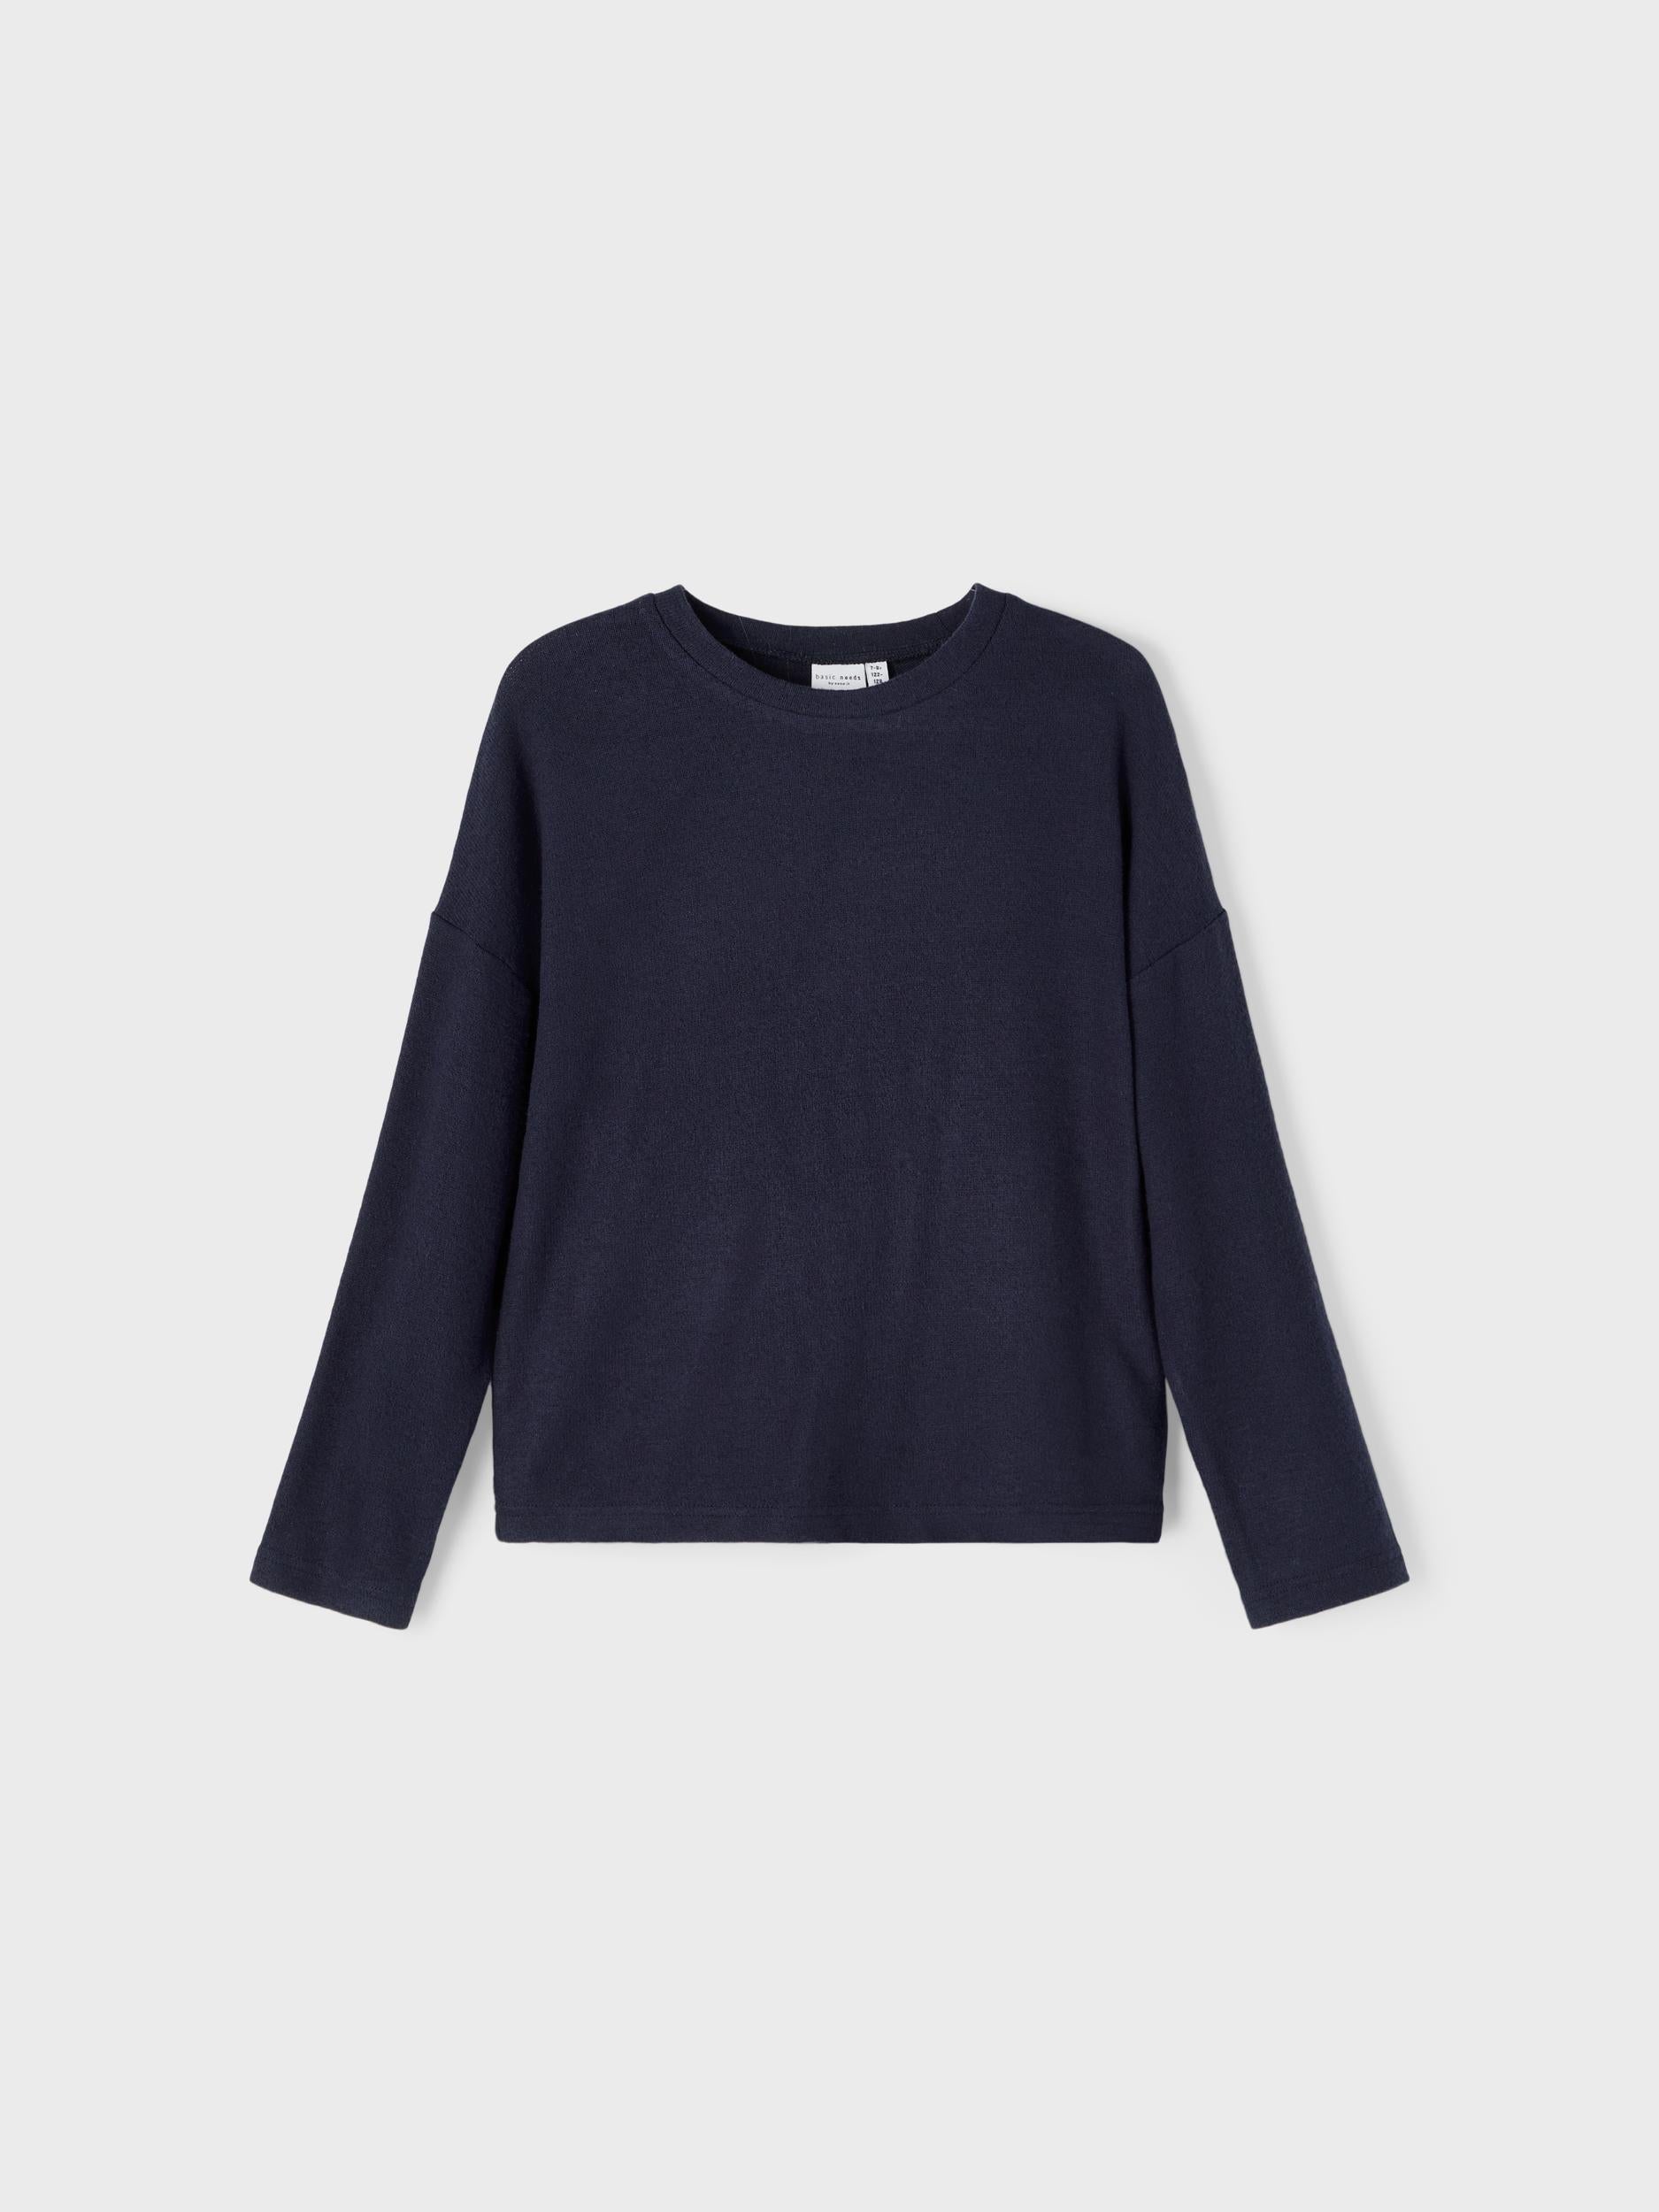 Victi Knit Noos Navy - Front View